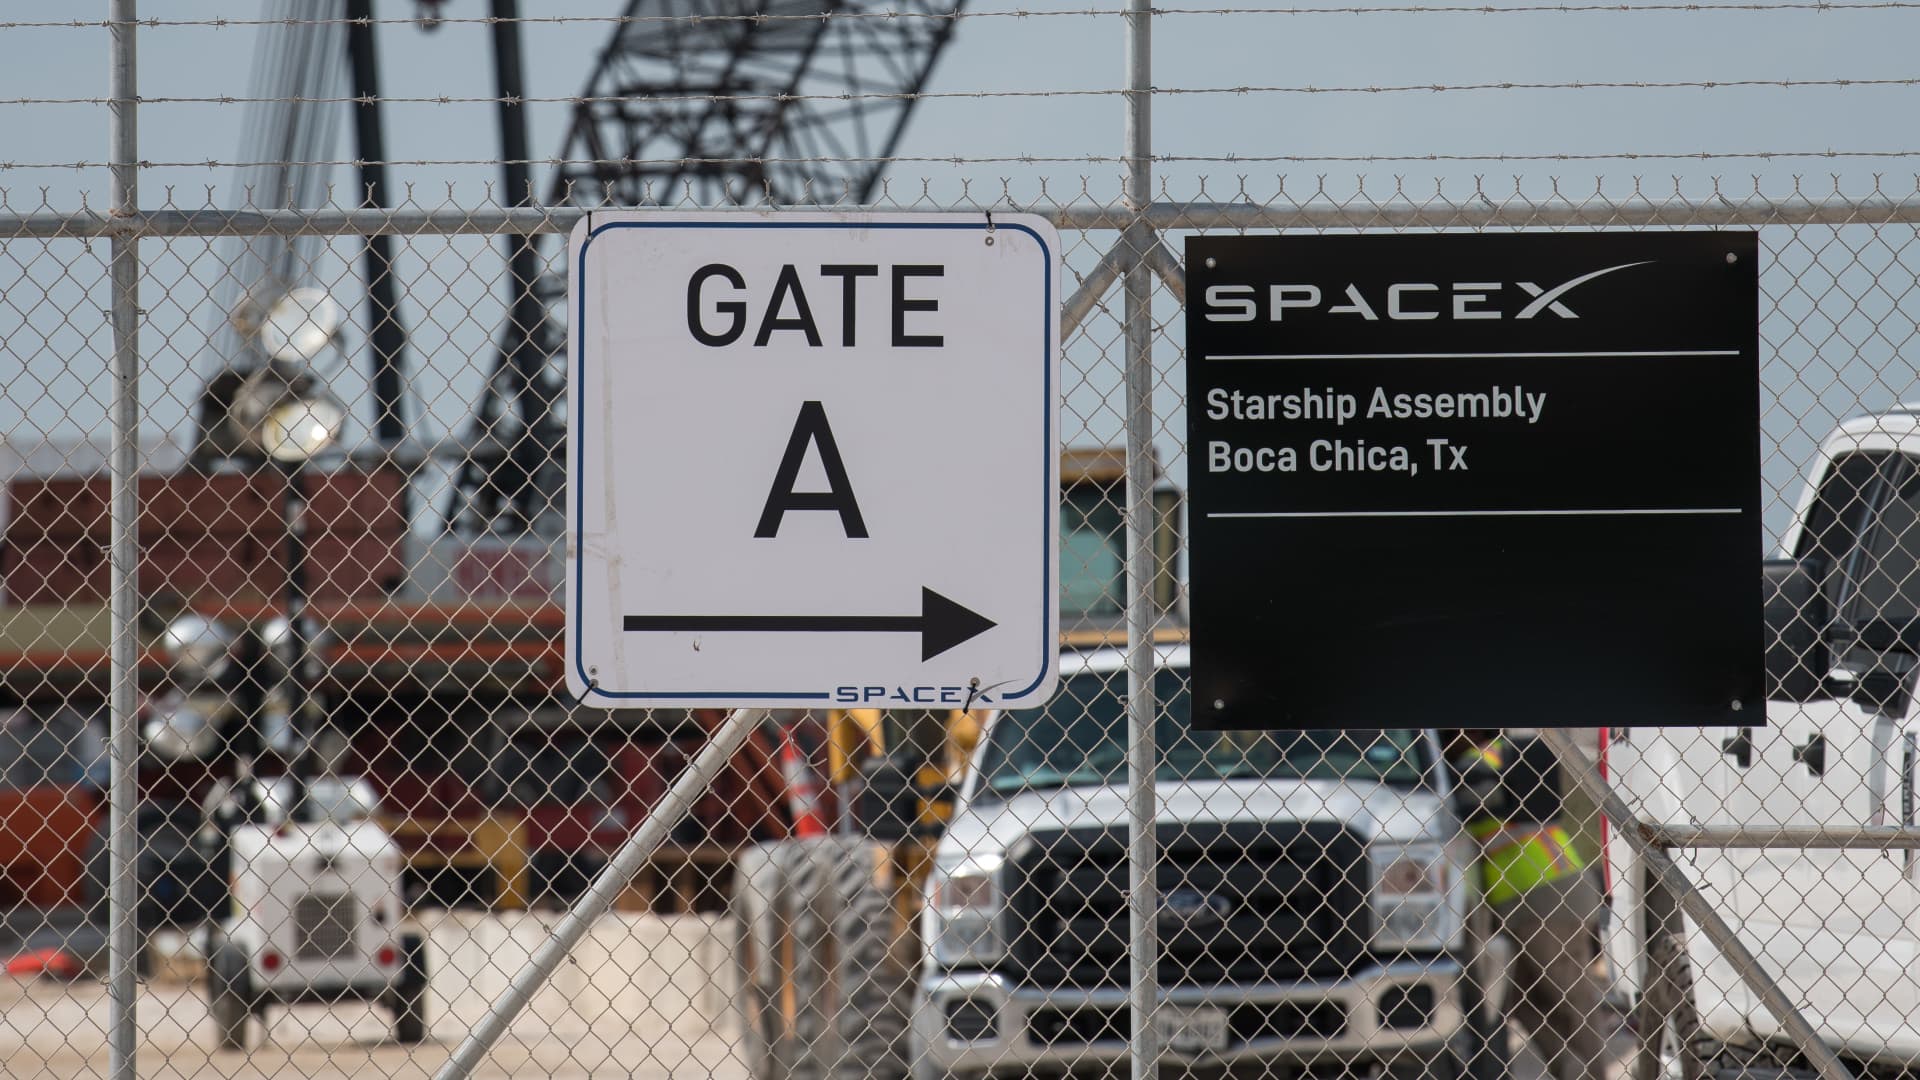 SpaceX hasn’t obtained environmental permits for ‘flame deflector’ arrangement it’s testing in Texas